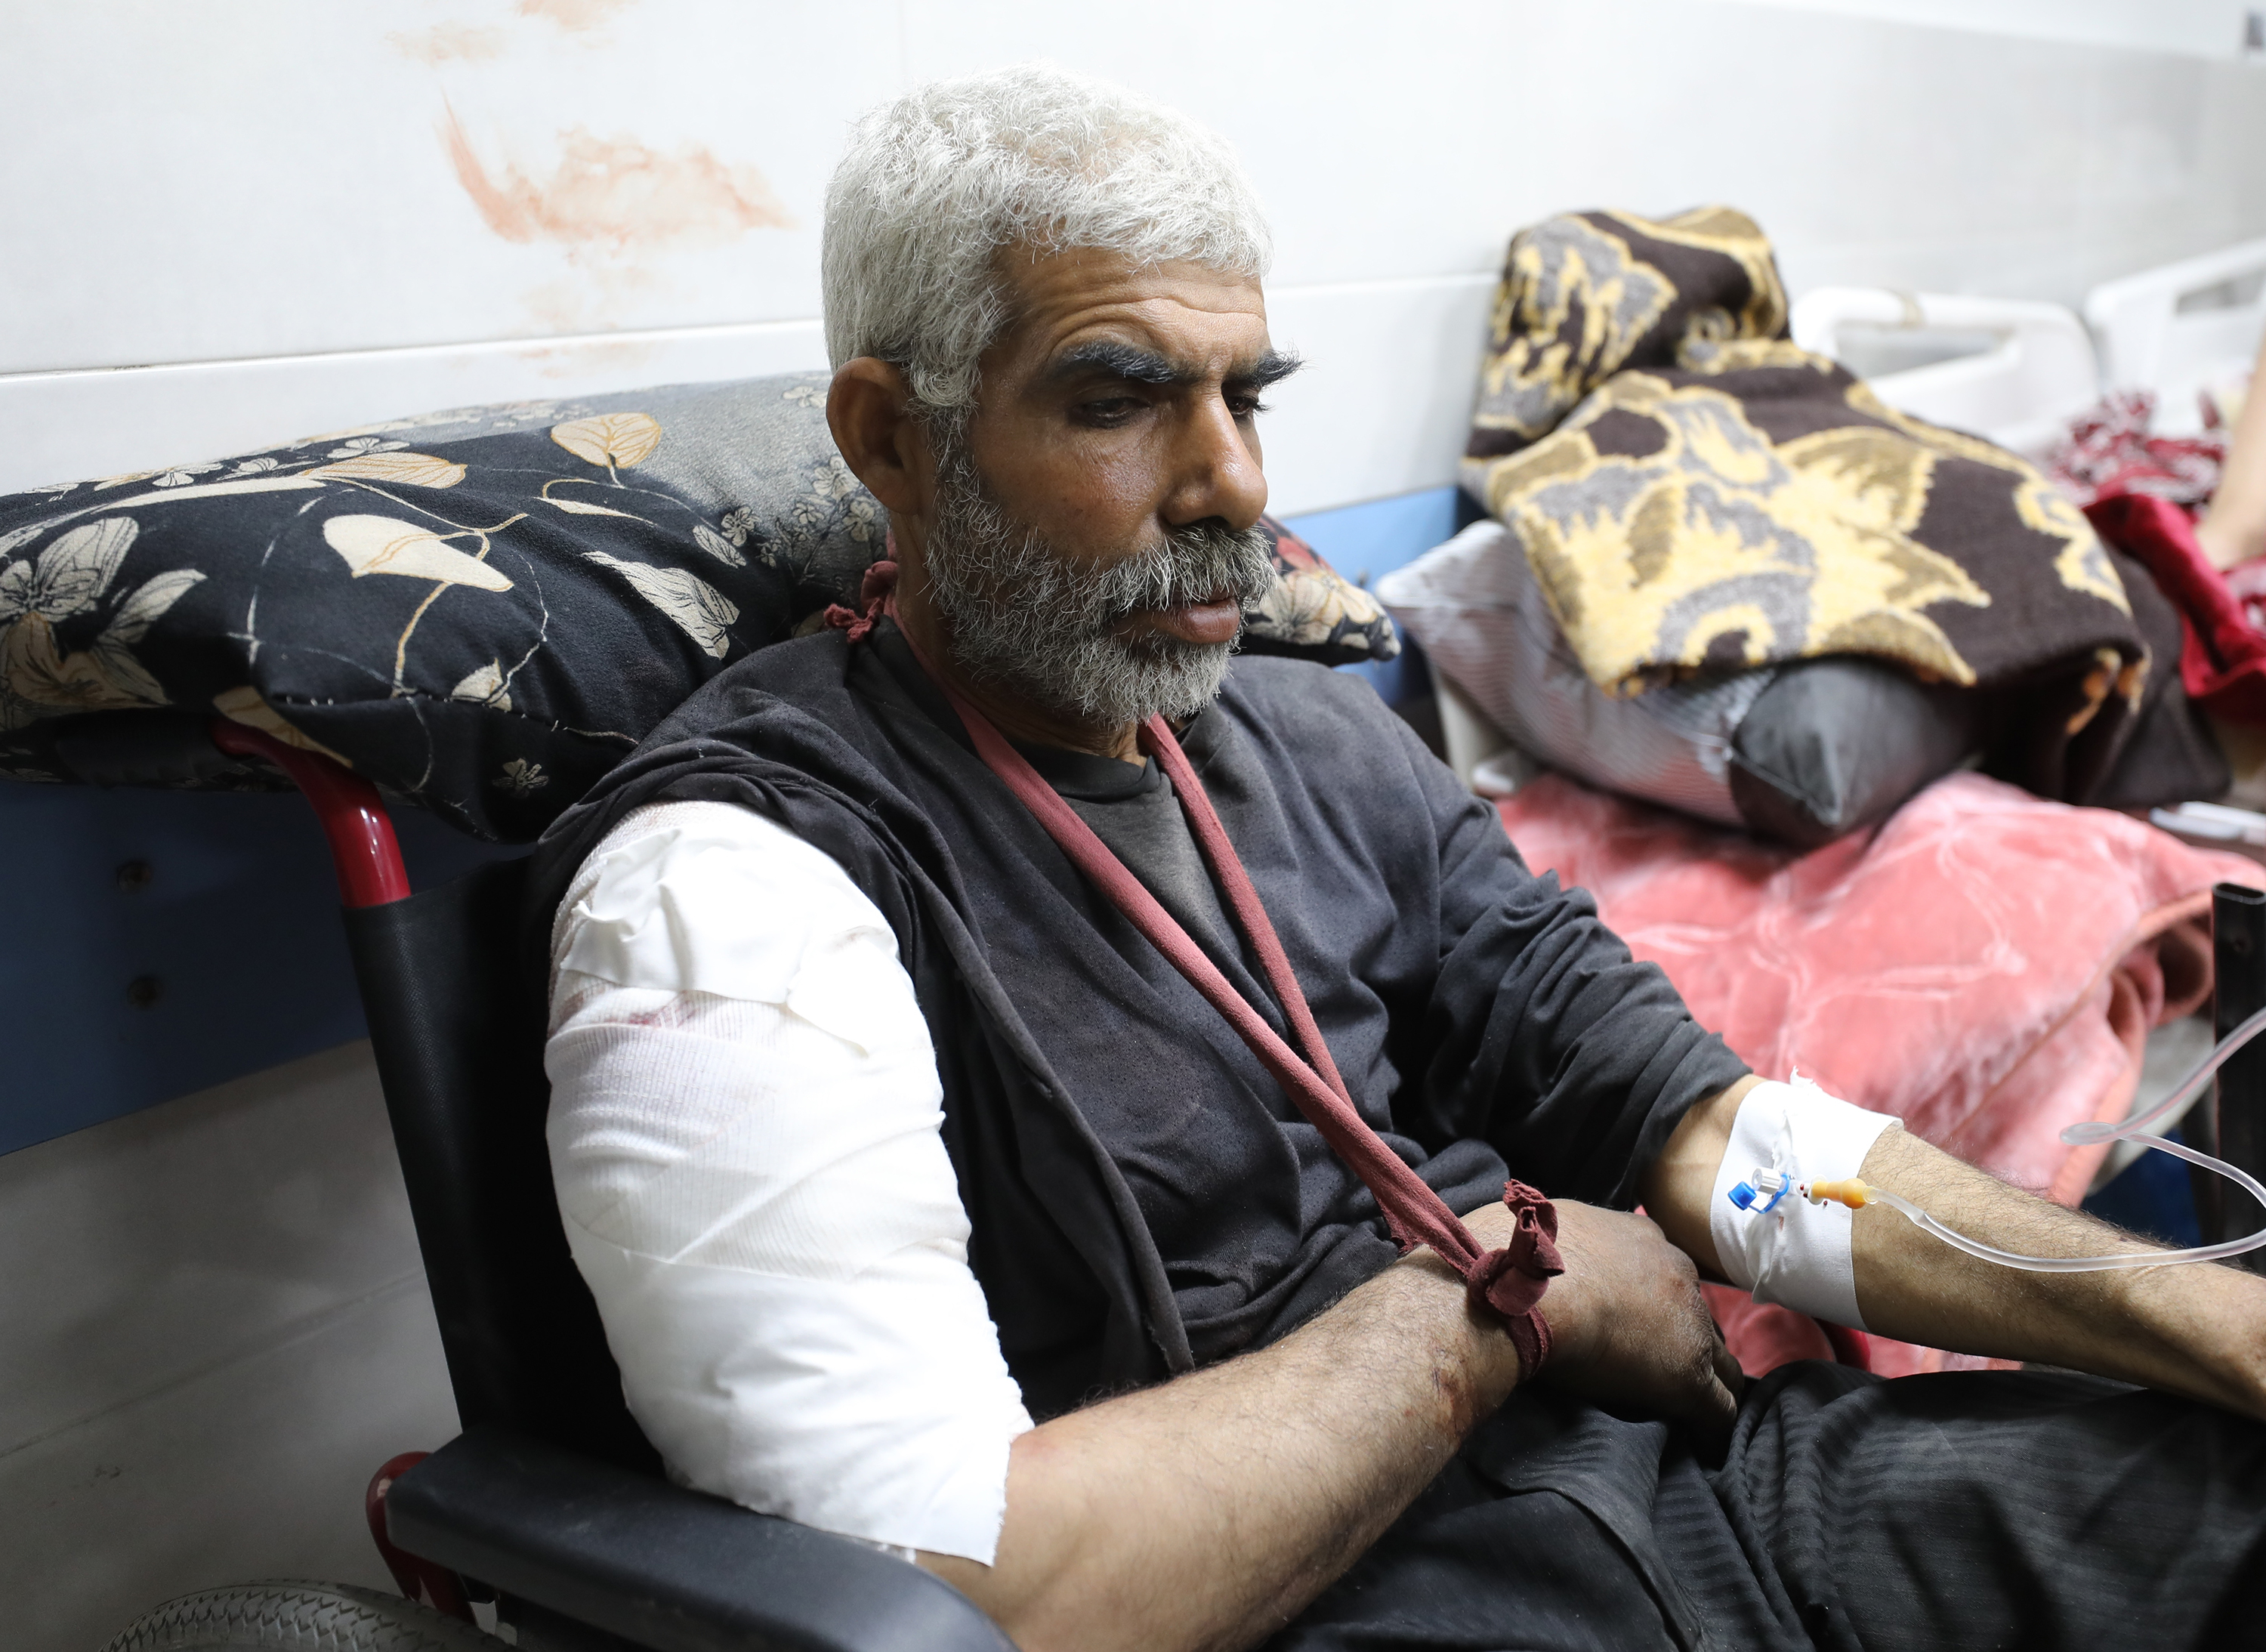 A wounded Palestinian receives medical treatment at Al-Shifa Hospital after Israeli forces opened fire on Palestinians waiting for humanitarian aid trucks on Al-Rashid Street in Gaza City, Gaza City, February 29.